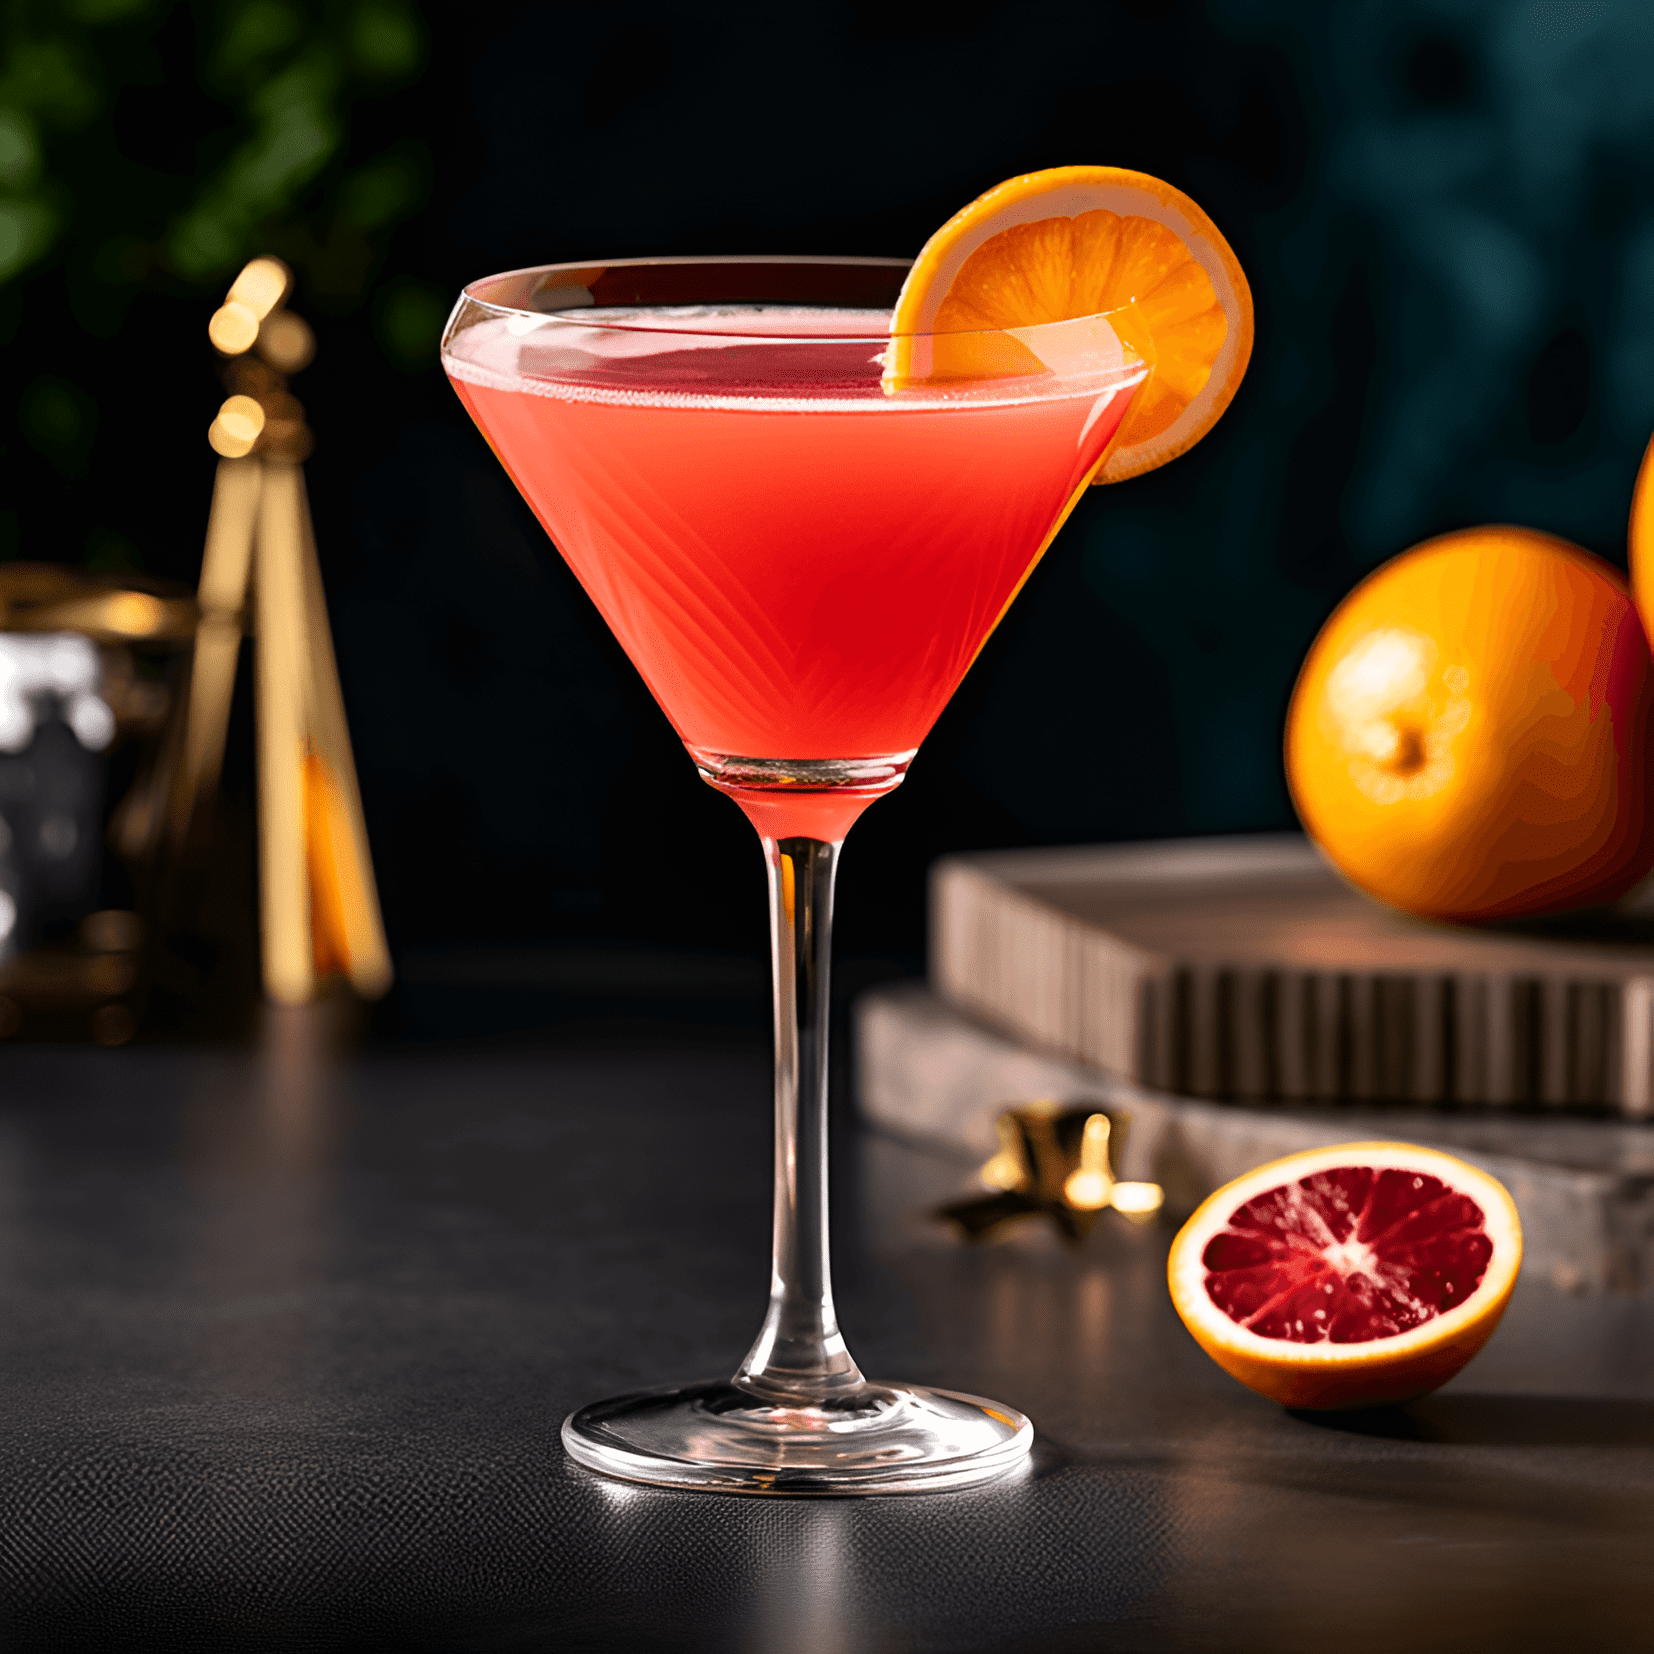 Orange Blossom Cocktail Recipe - The Orange Blossom cocktail has a sweet and citrusy taste, with a hint of floral notes. The combination of orange juice and gin creates a refreshing and light flavor, while the addition of simple syrup adds a touch of sweetness.